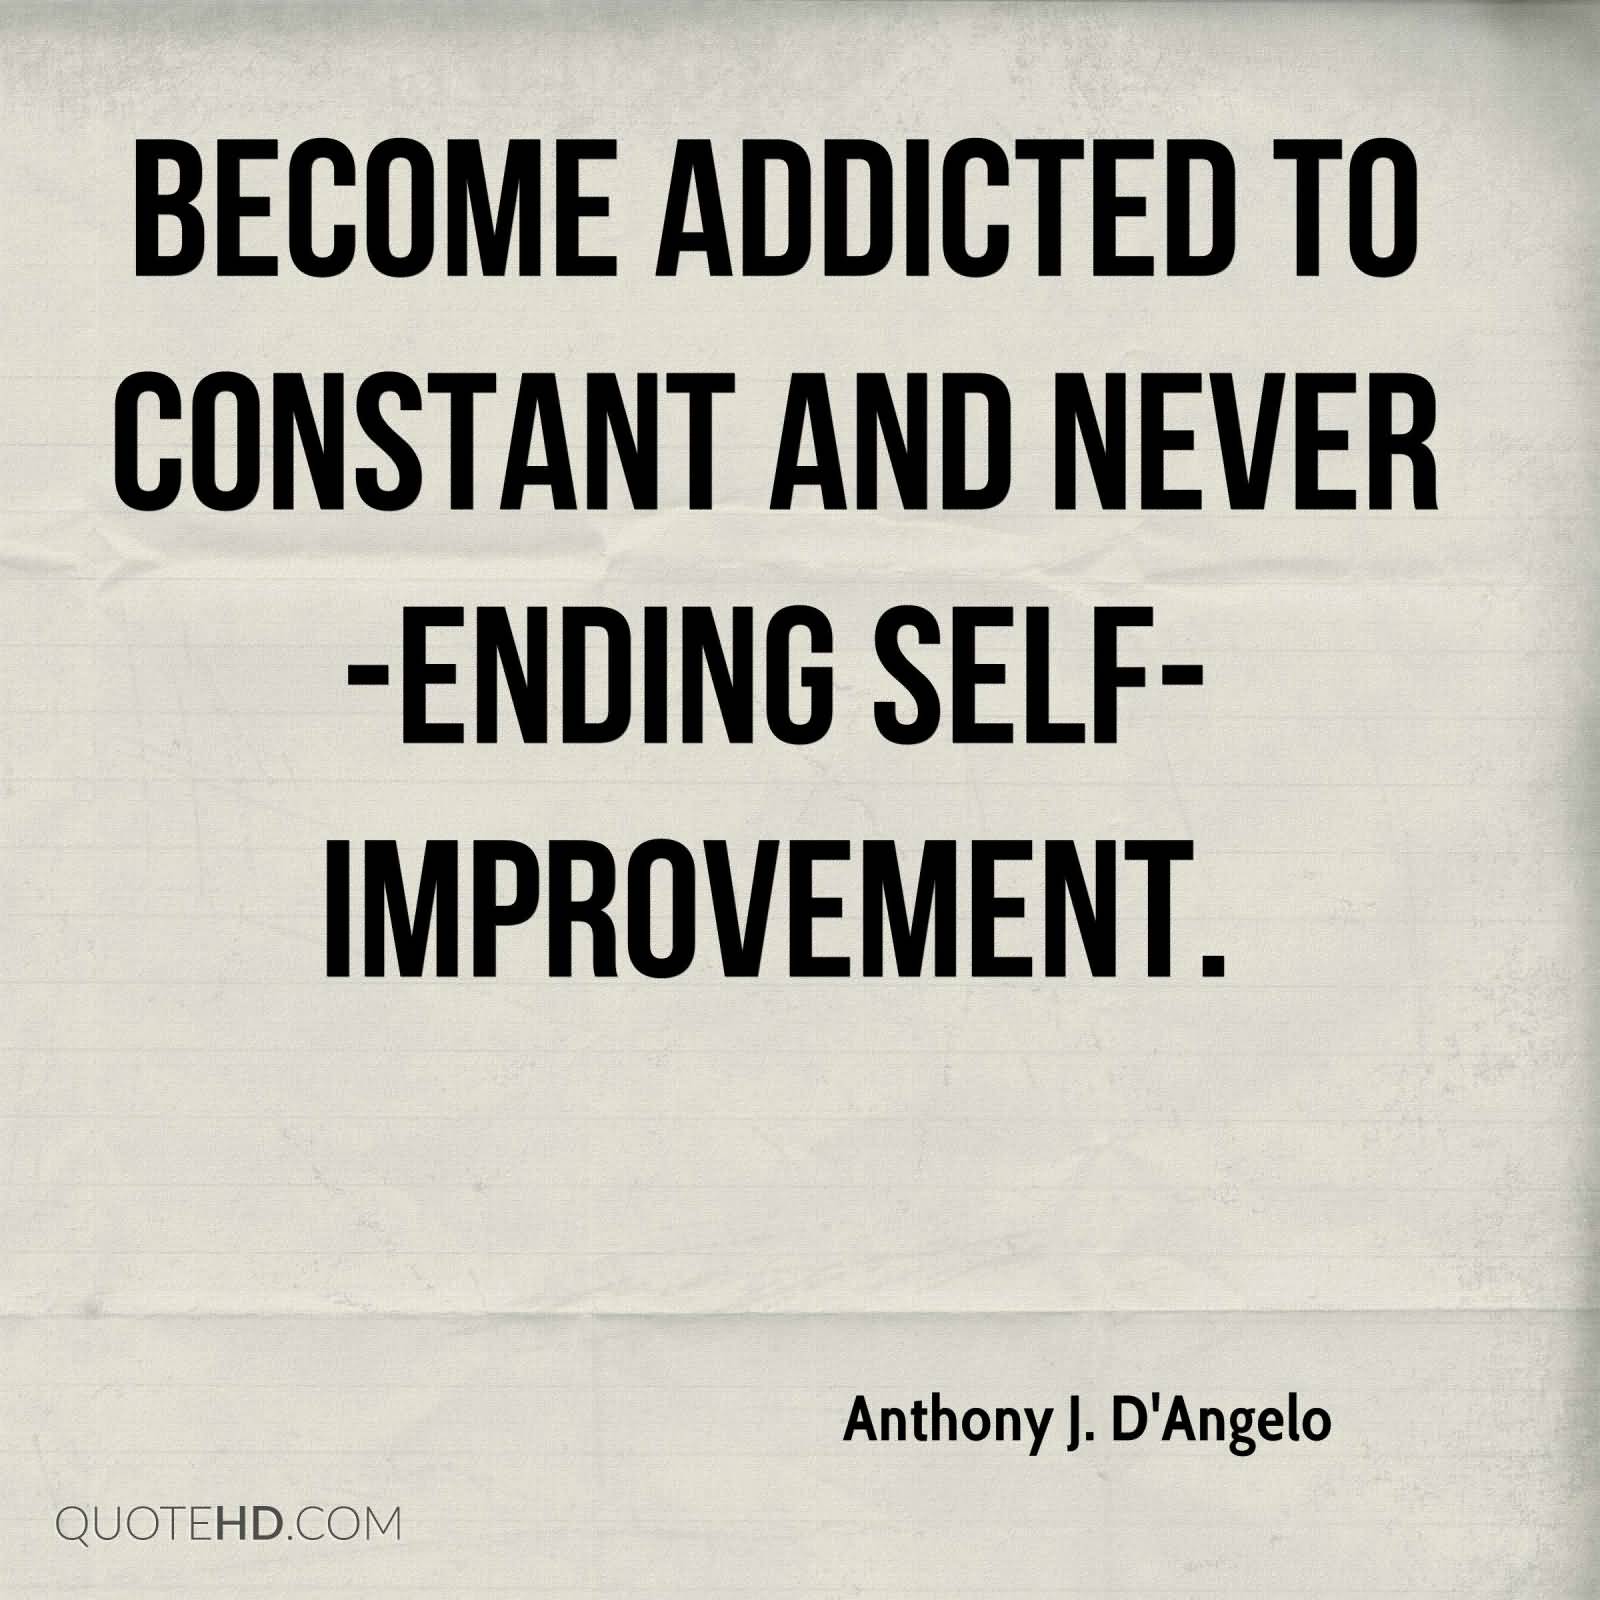 Become addicted to constant and never-ending self improvement. Anthony J. D'Angelo